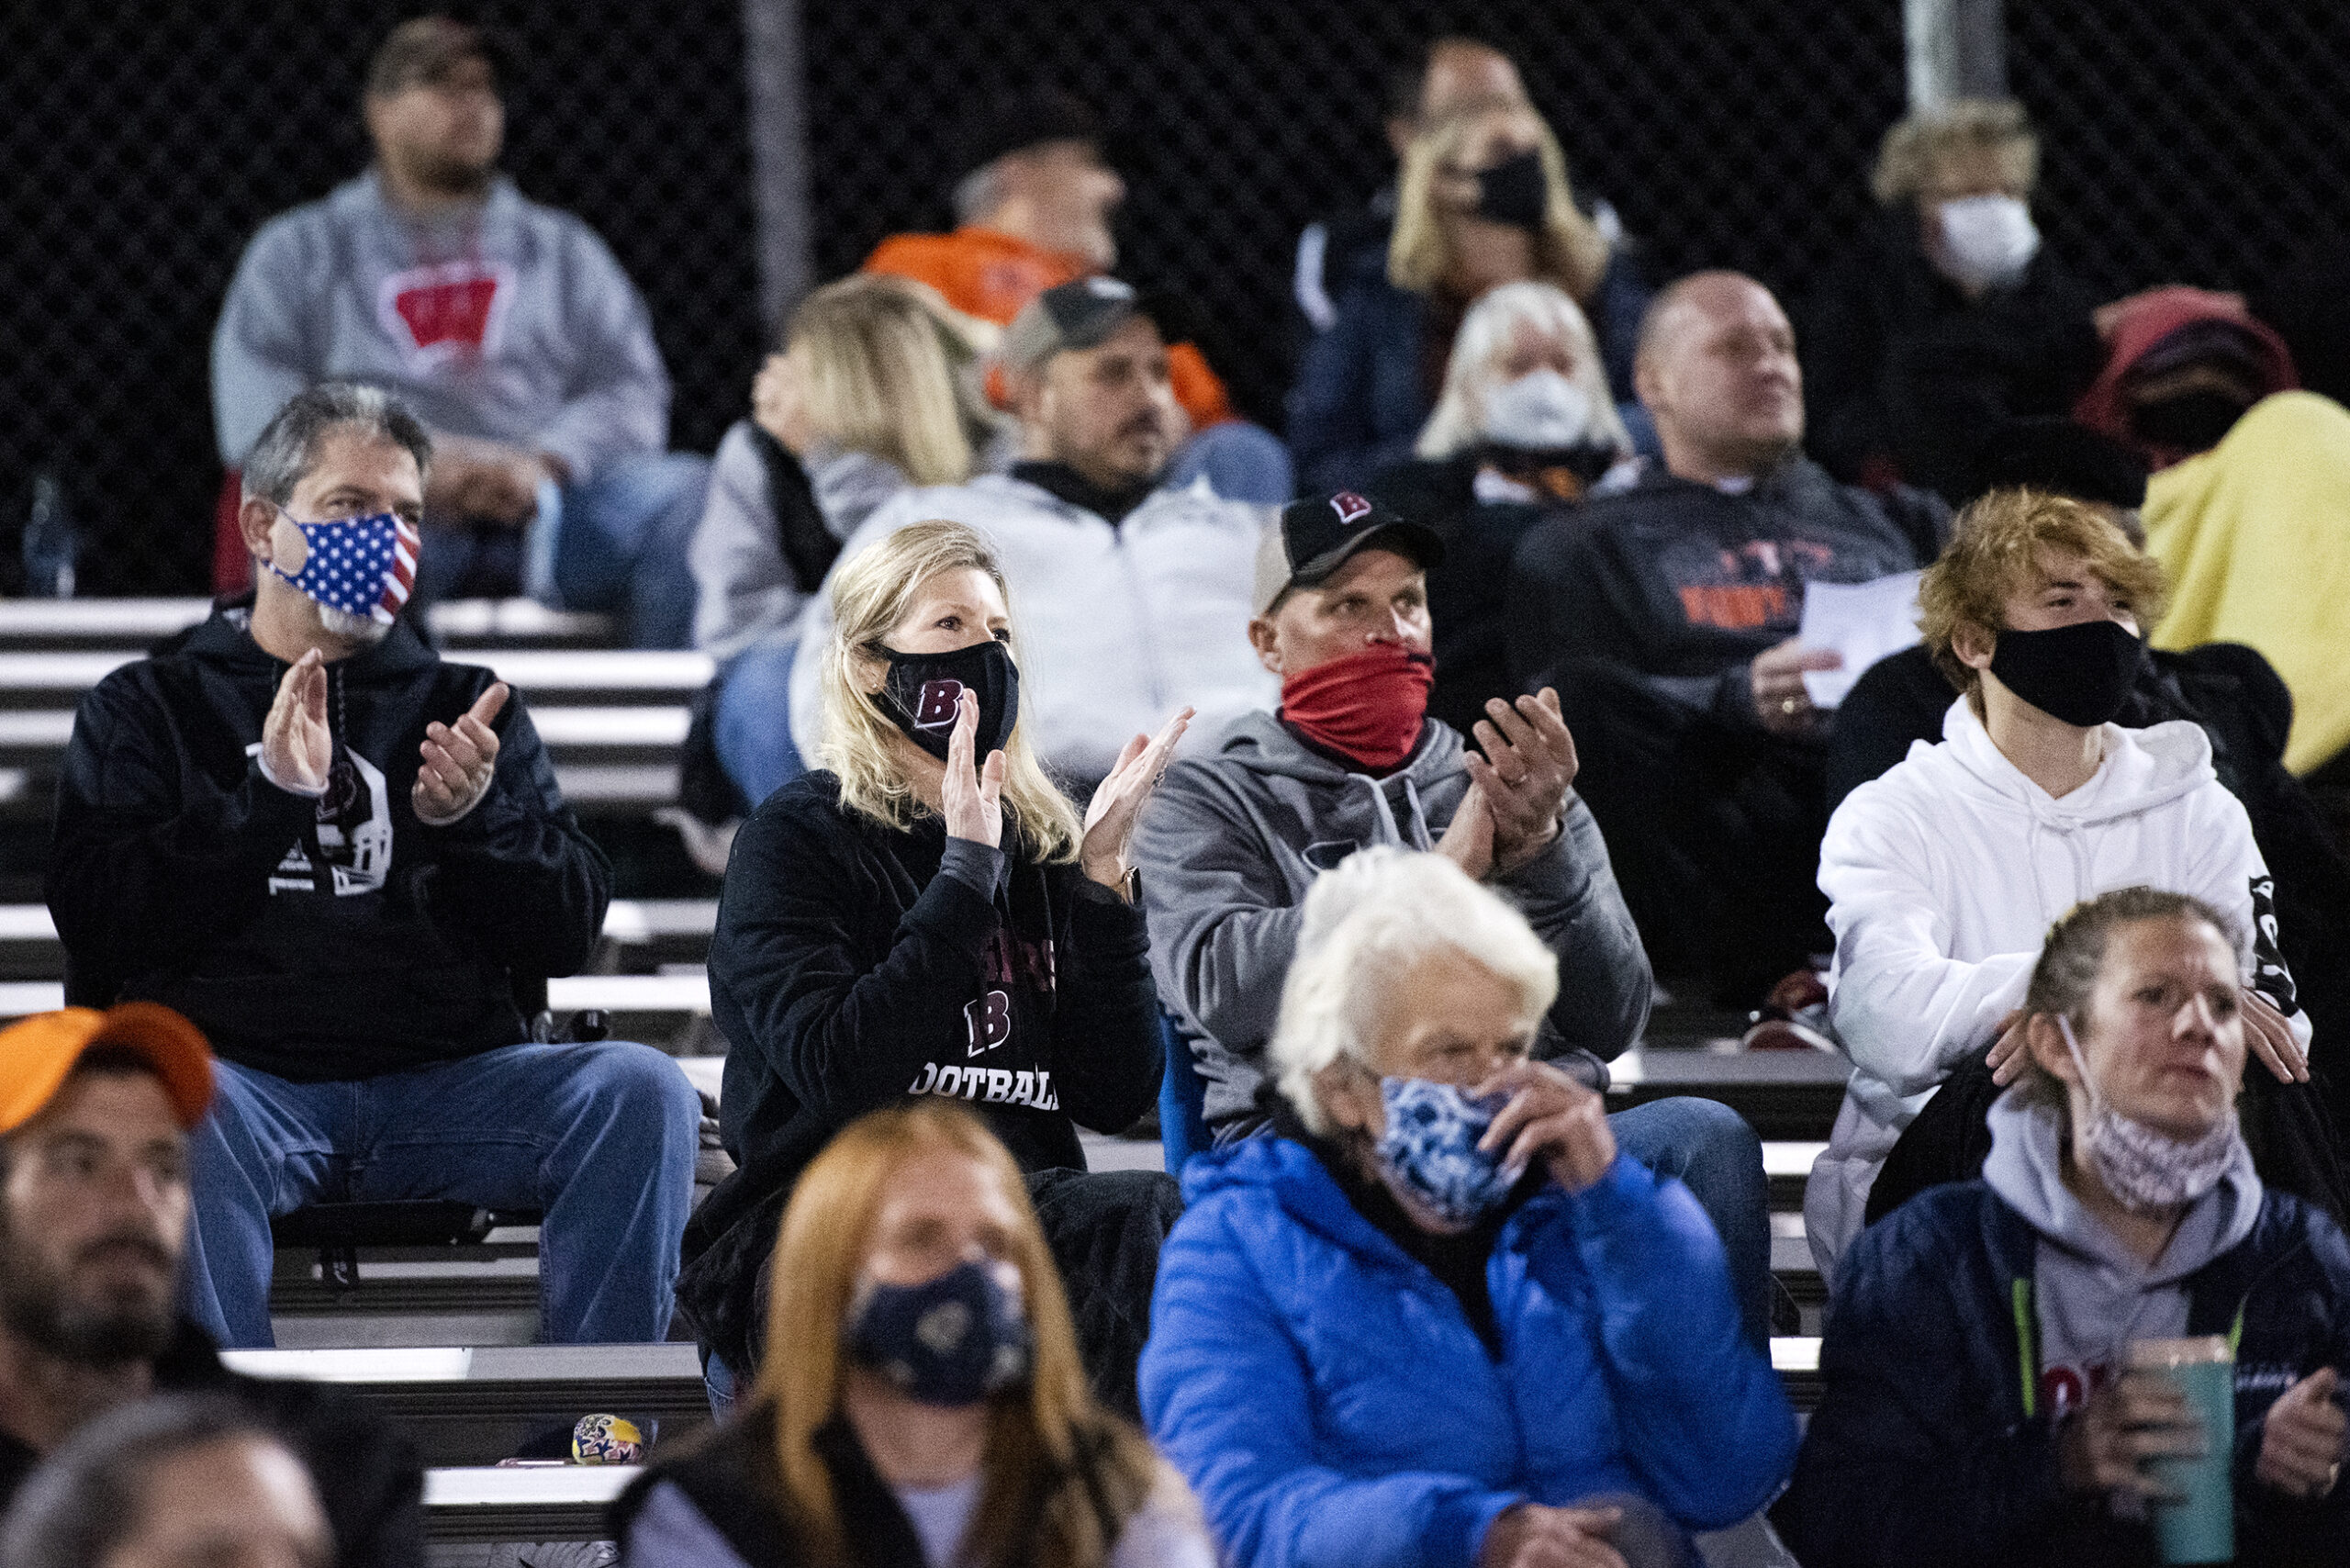 fans in face masks applaud from the bleachers